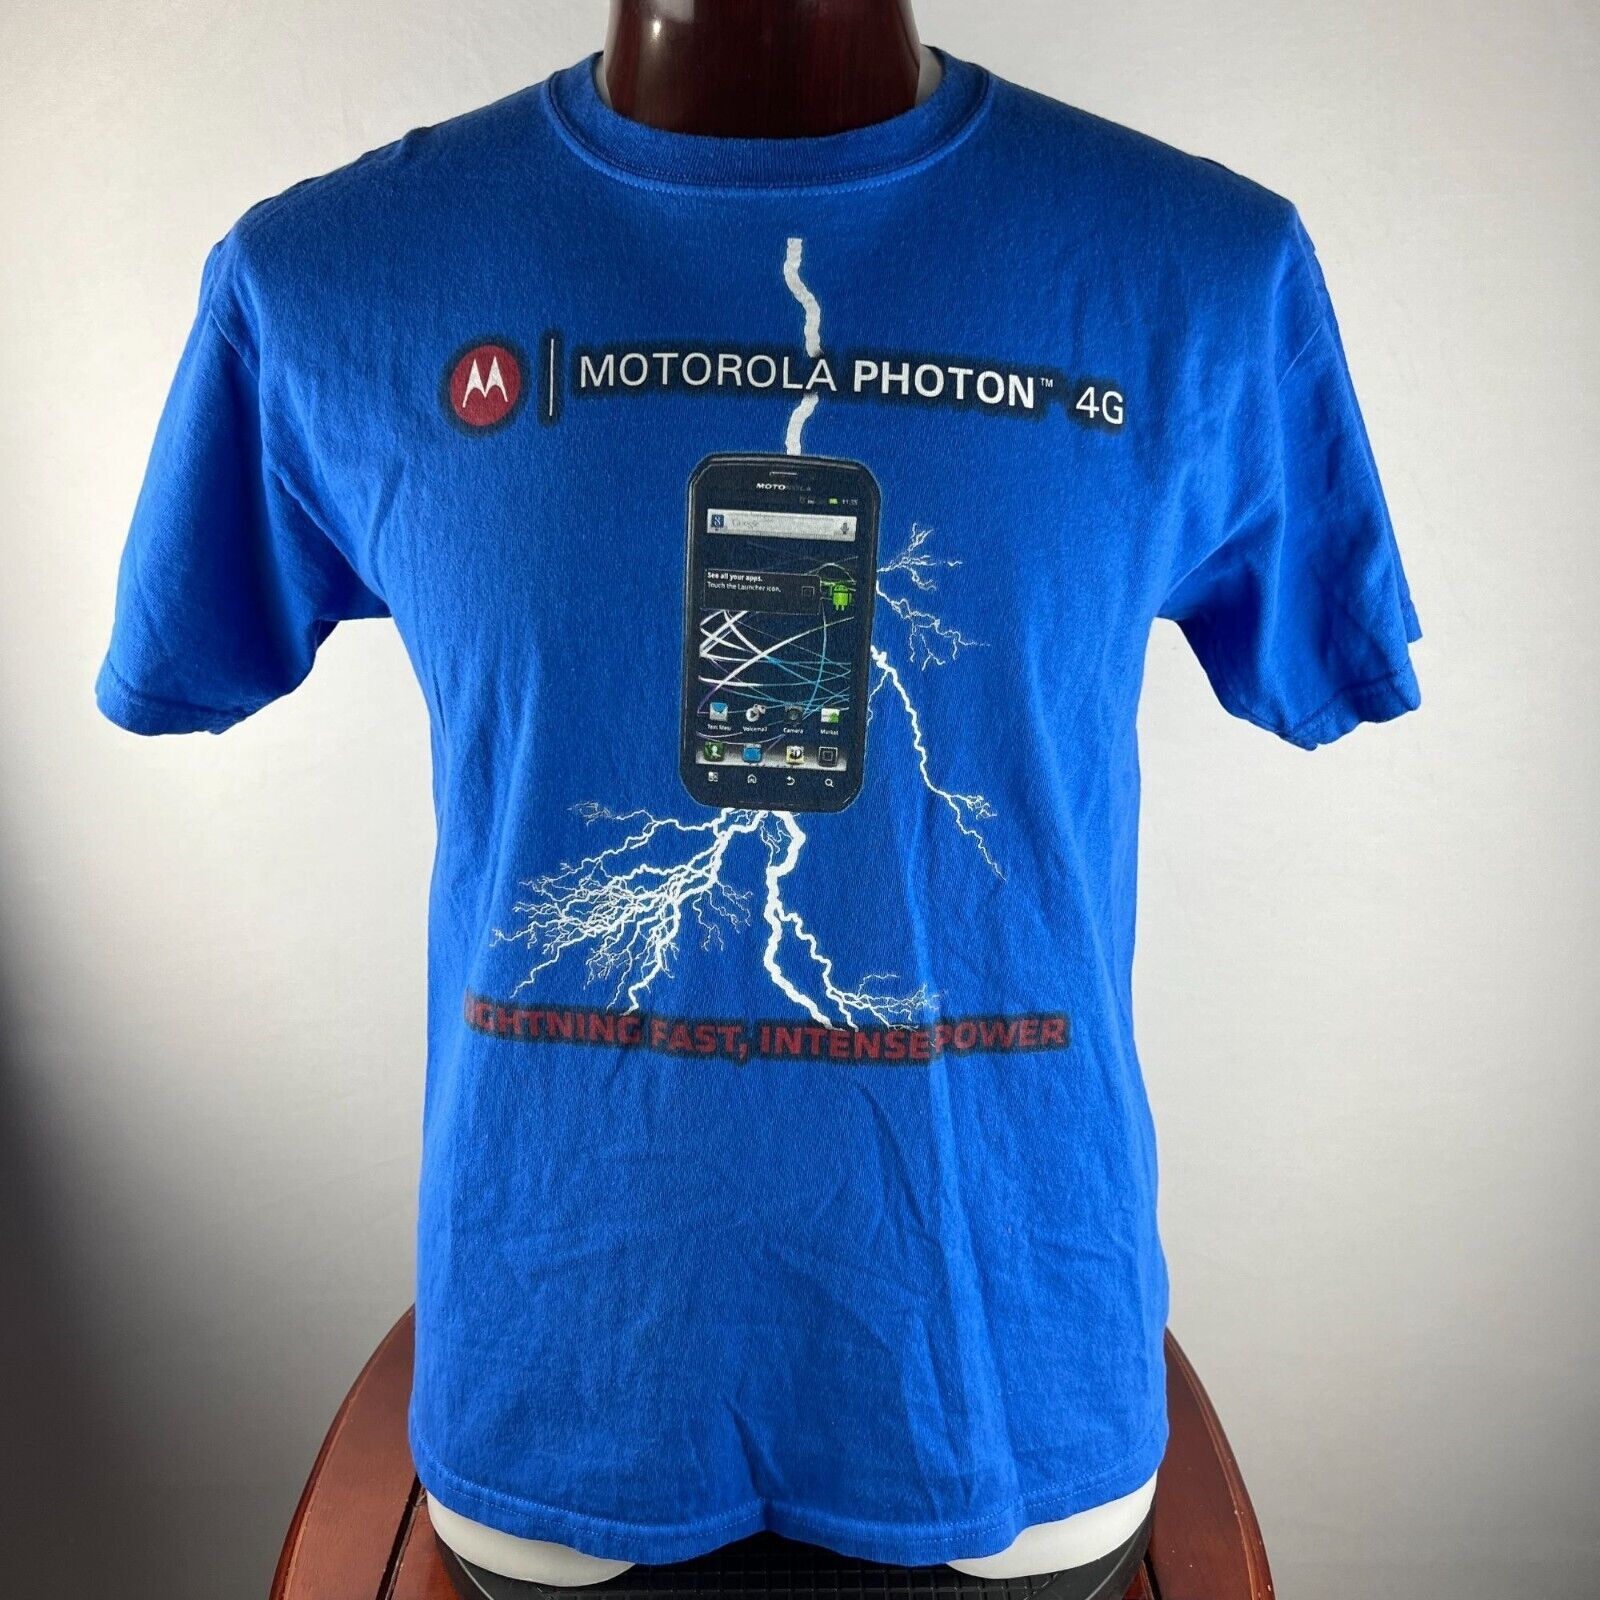 Primary image for Motorola Phonton 4G Cell Phone Large T-Shirt